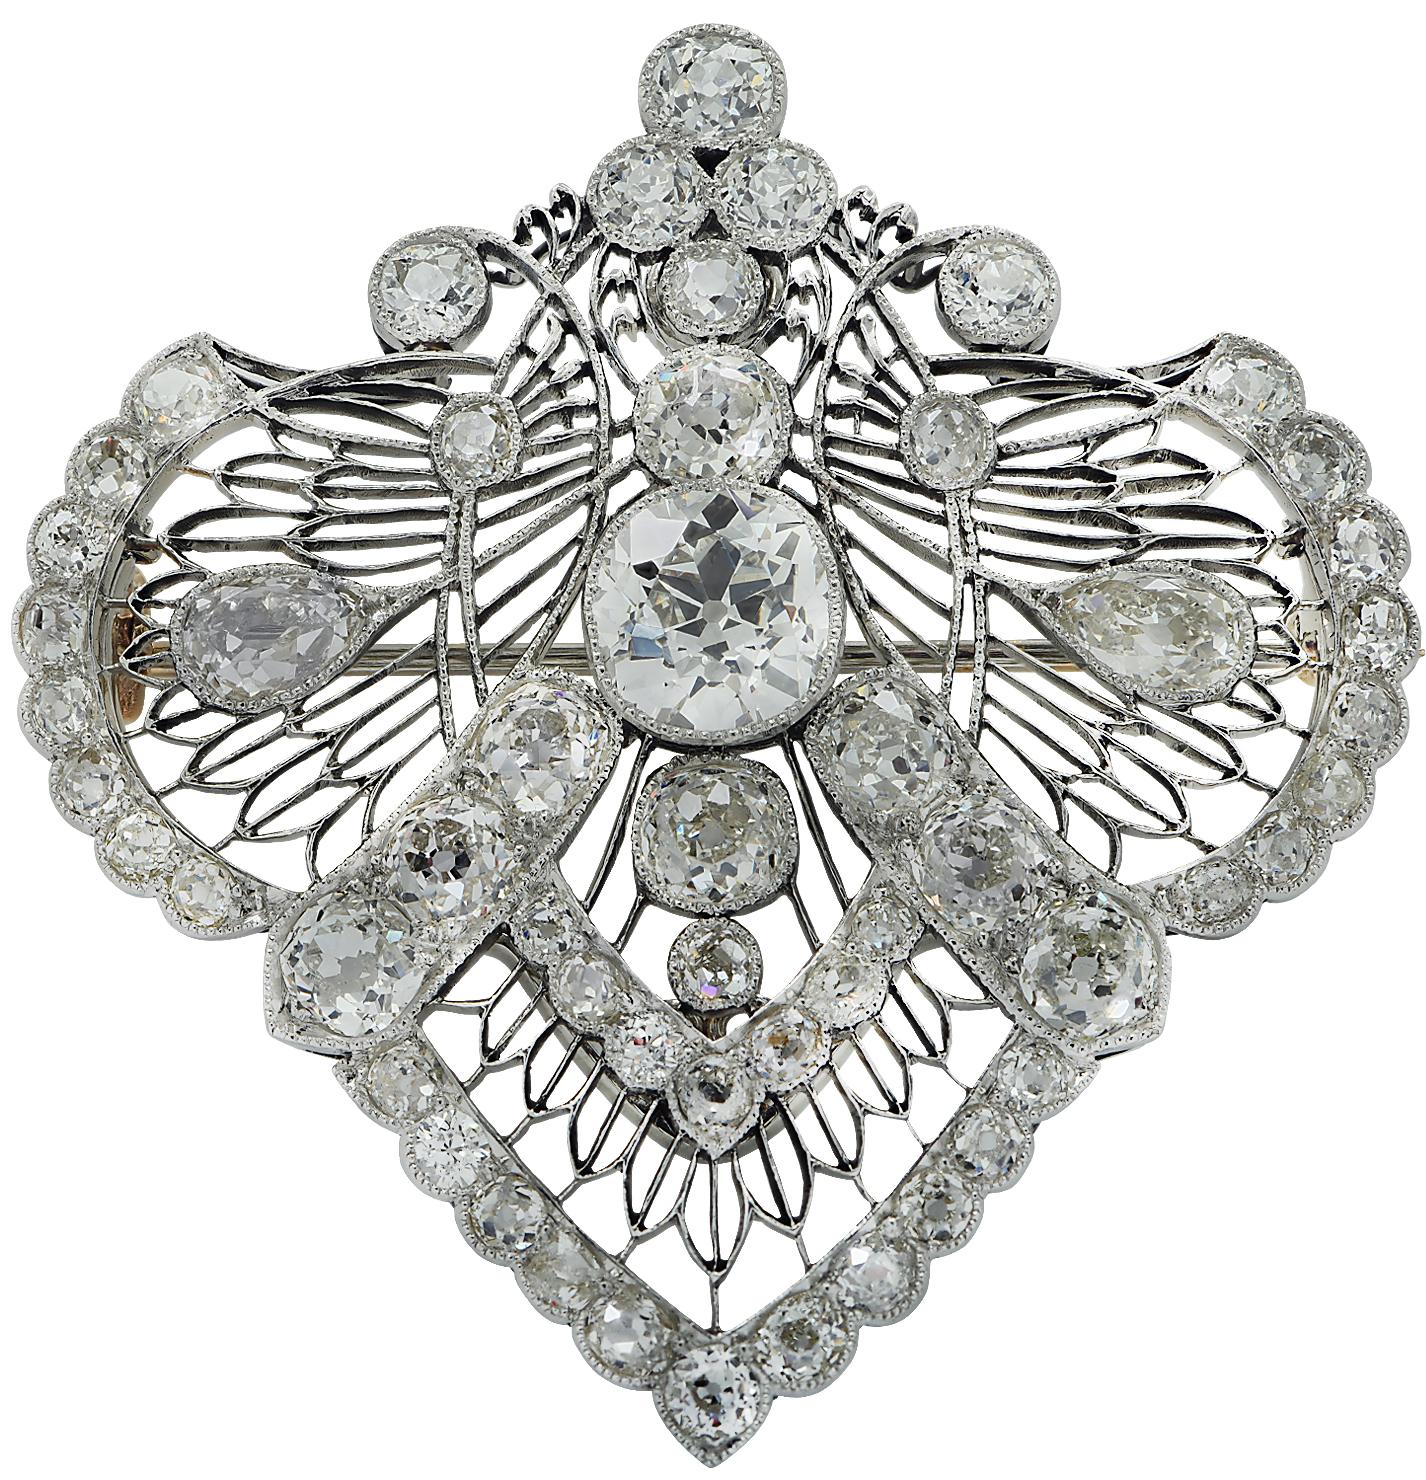 Beautiful Edwardian brooch pin/necklace intricately crafted in platinum and yellow gold showcasing 58 Old Miner Cut diamonds weighing approximately 14.60 carats total, H-I color, VS-SI clarity. The center Old Miner stone is certified by the GIA, and